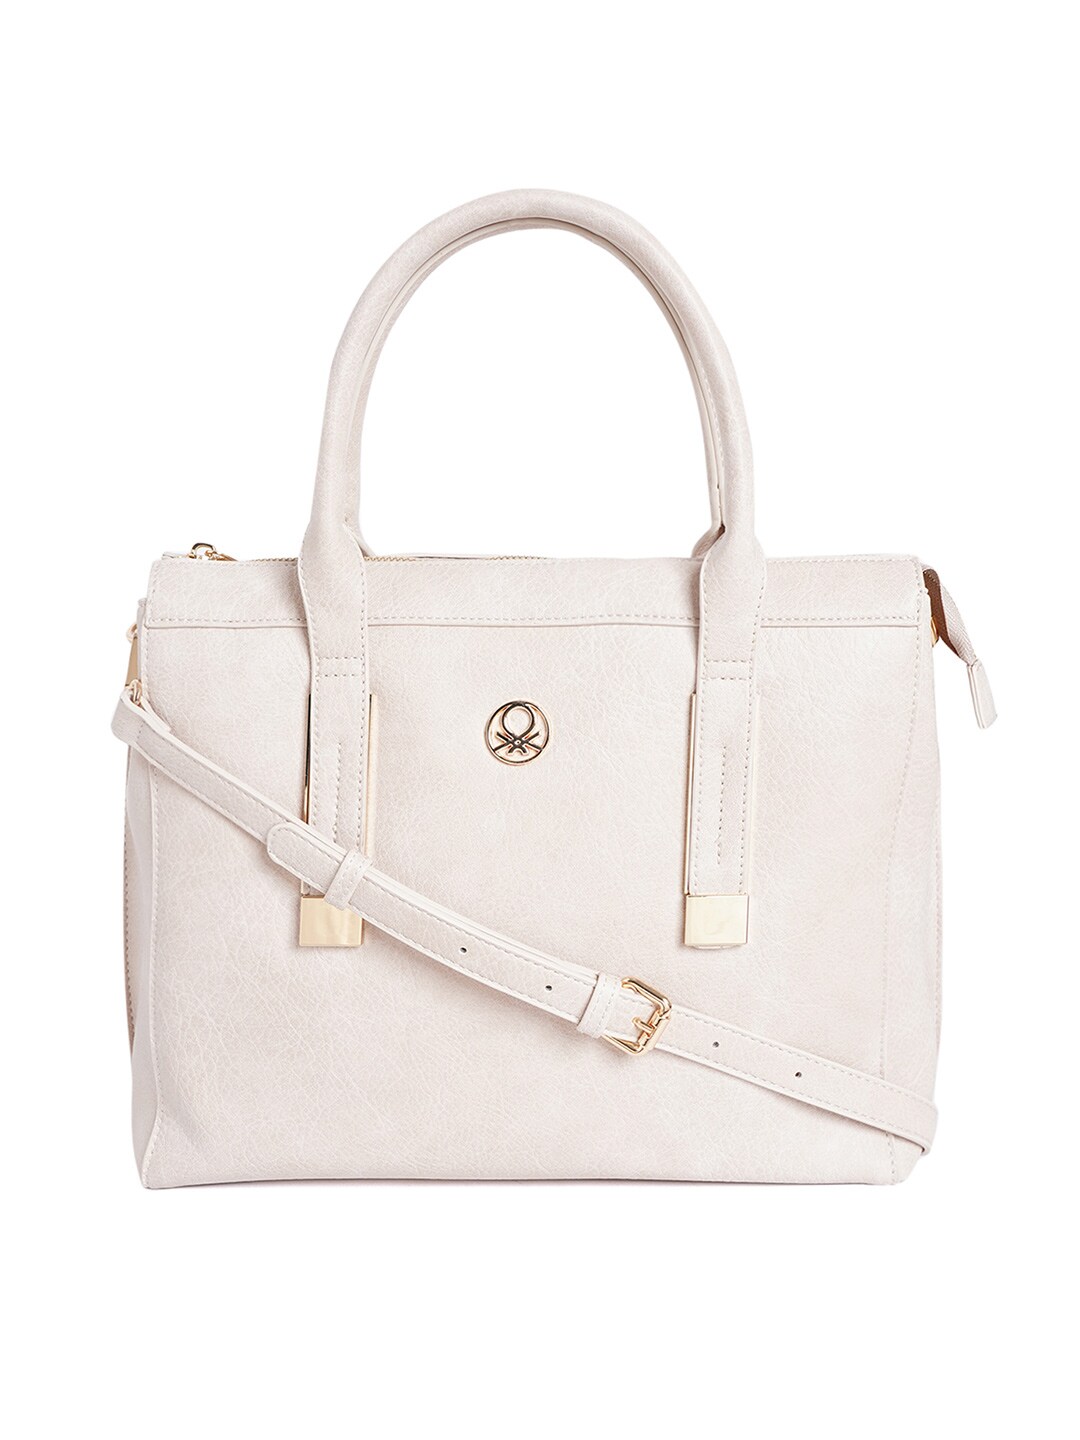 United Colors of Benetton Beige Structured Handheld Bag Price in India